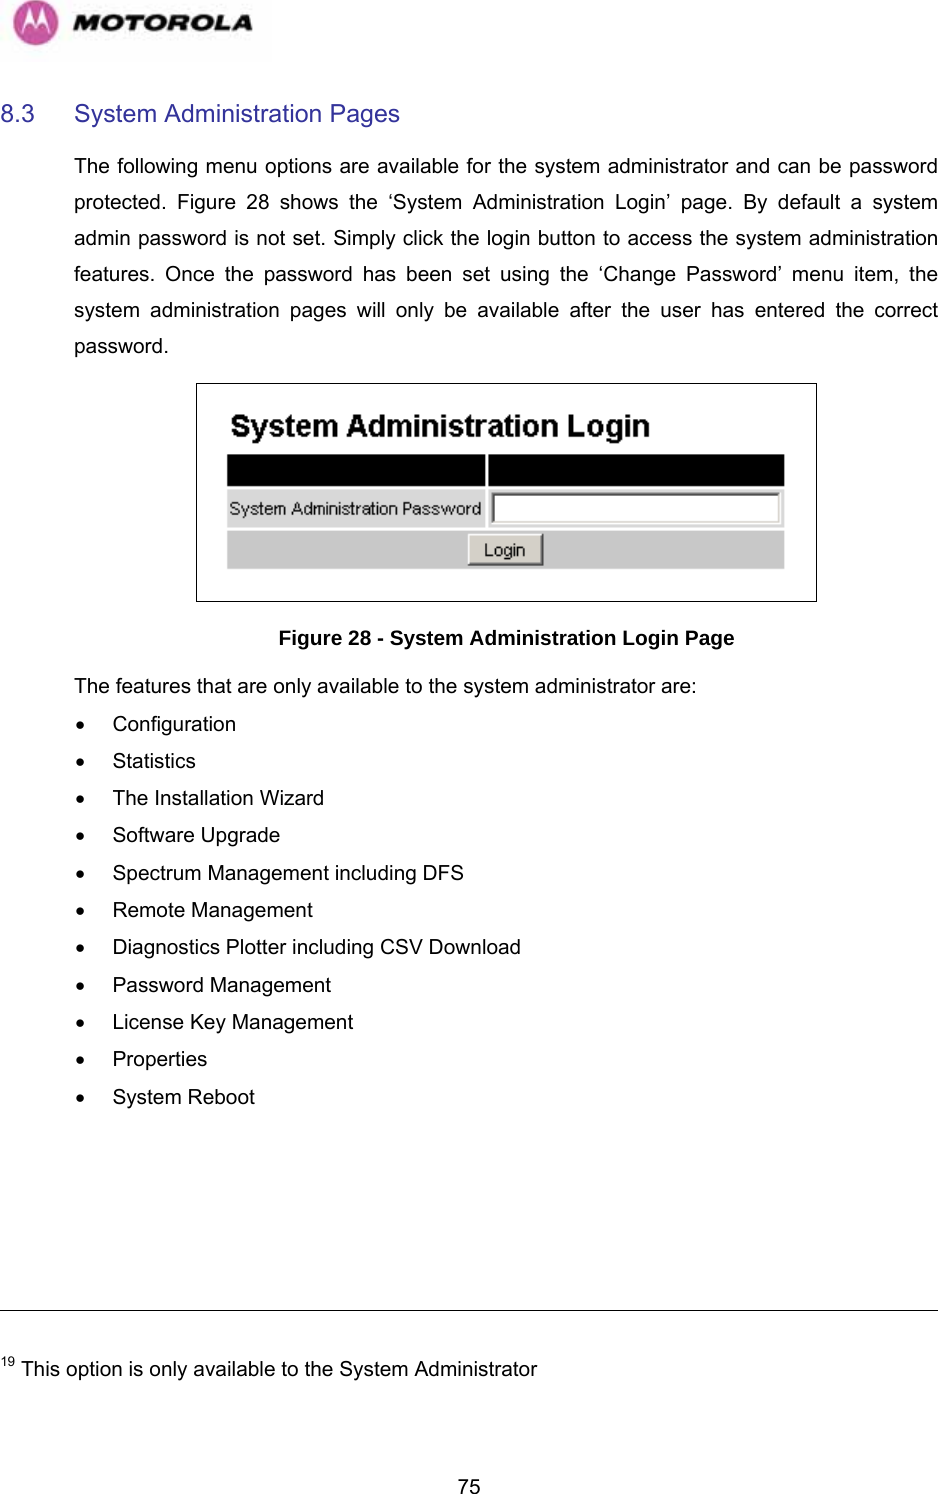   758.3  System Administration Pages  The following menu options are available for the system administrator and can be password protected.  Figure 28 shows the ‘System Administration Login’ page. By default a system admin password is not set. Simply click the login button to access the system administration features. Once the password has been set using the ‘Change Password’ menu item, the system administration pages will only be available after the user has entered the correct password.  Figure 28 - System Administration Login Page The features that are only available to the system administrator are: • Configuration • Statistics •  The Installation Wizard • Software Upgrade •  Spectrum Management including DFS • Remote Management •  Diagnostics Plotter including CSV Download • Password Management •  License Key Management • Properties • System Reboot                                                                                                                                                                      19 This option is only available to the System Administrator 